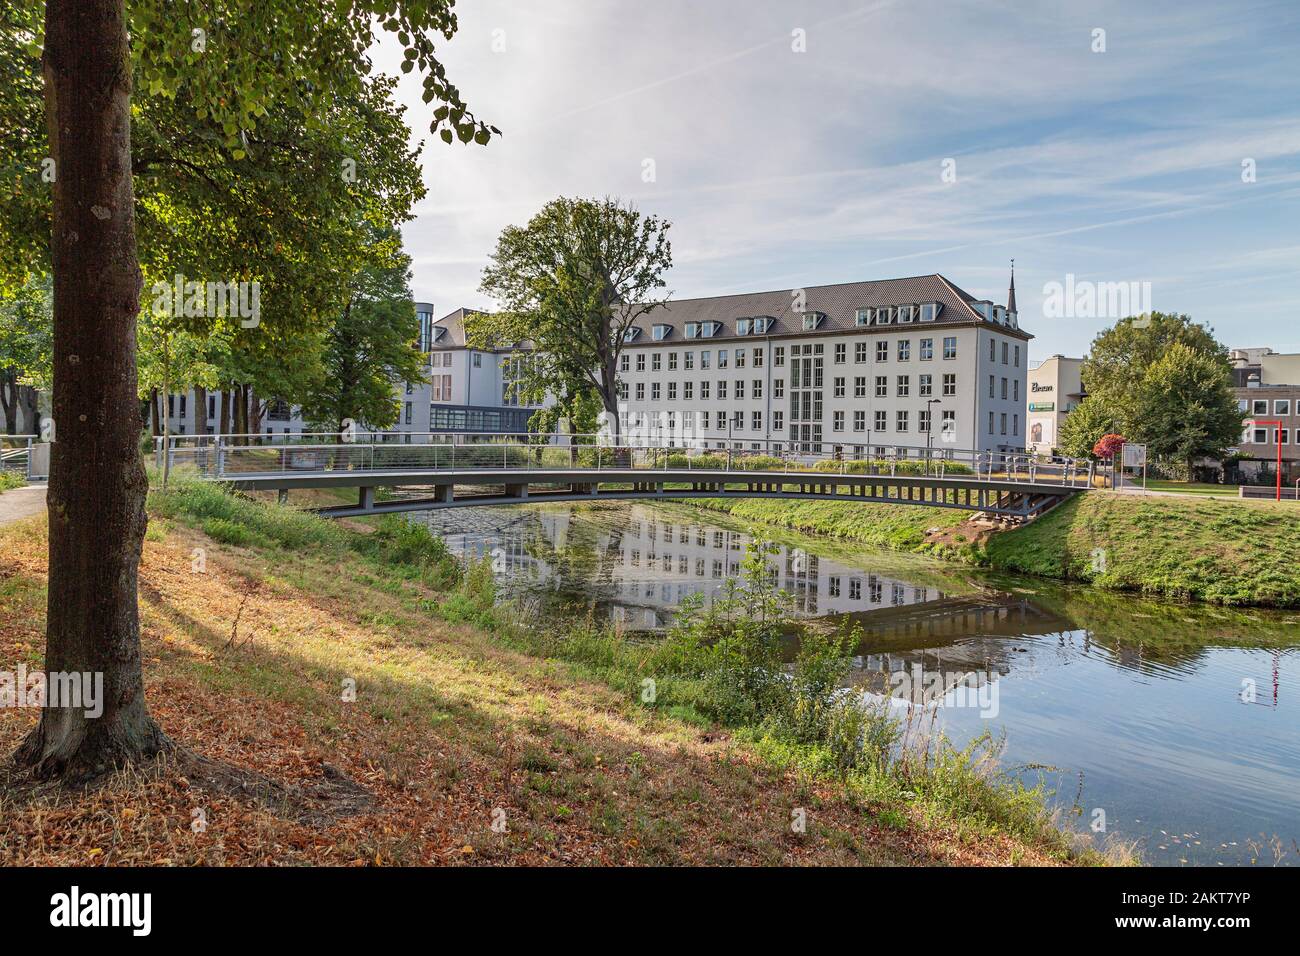 Moers - View to Rearside of Townhall with iron pedestrian bridge, North Rhine Westphalia, Germany, Moers, 26.08.2018 Stock Photo